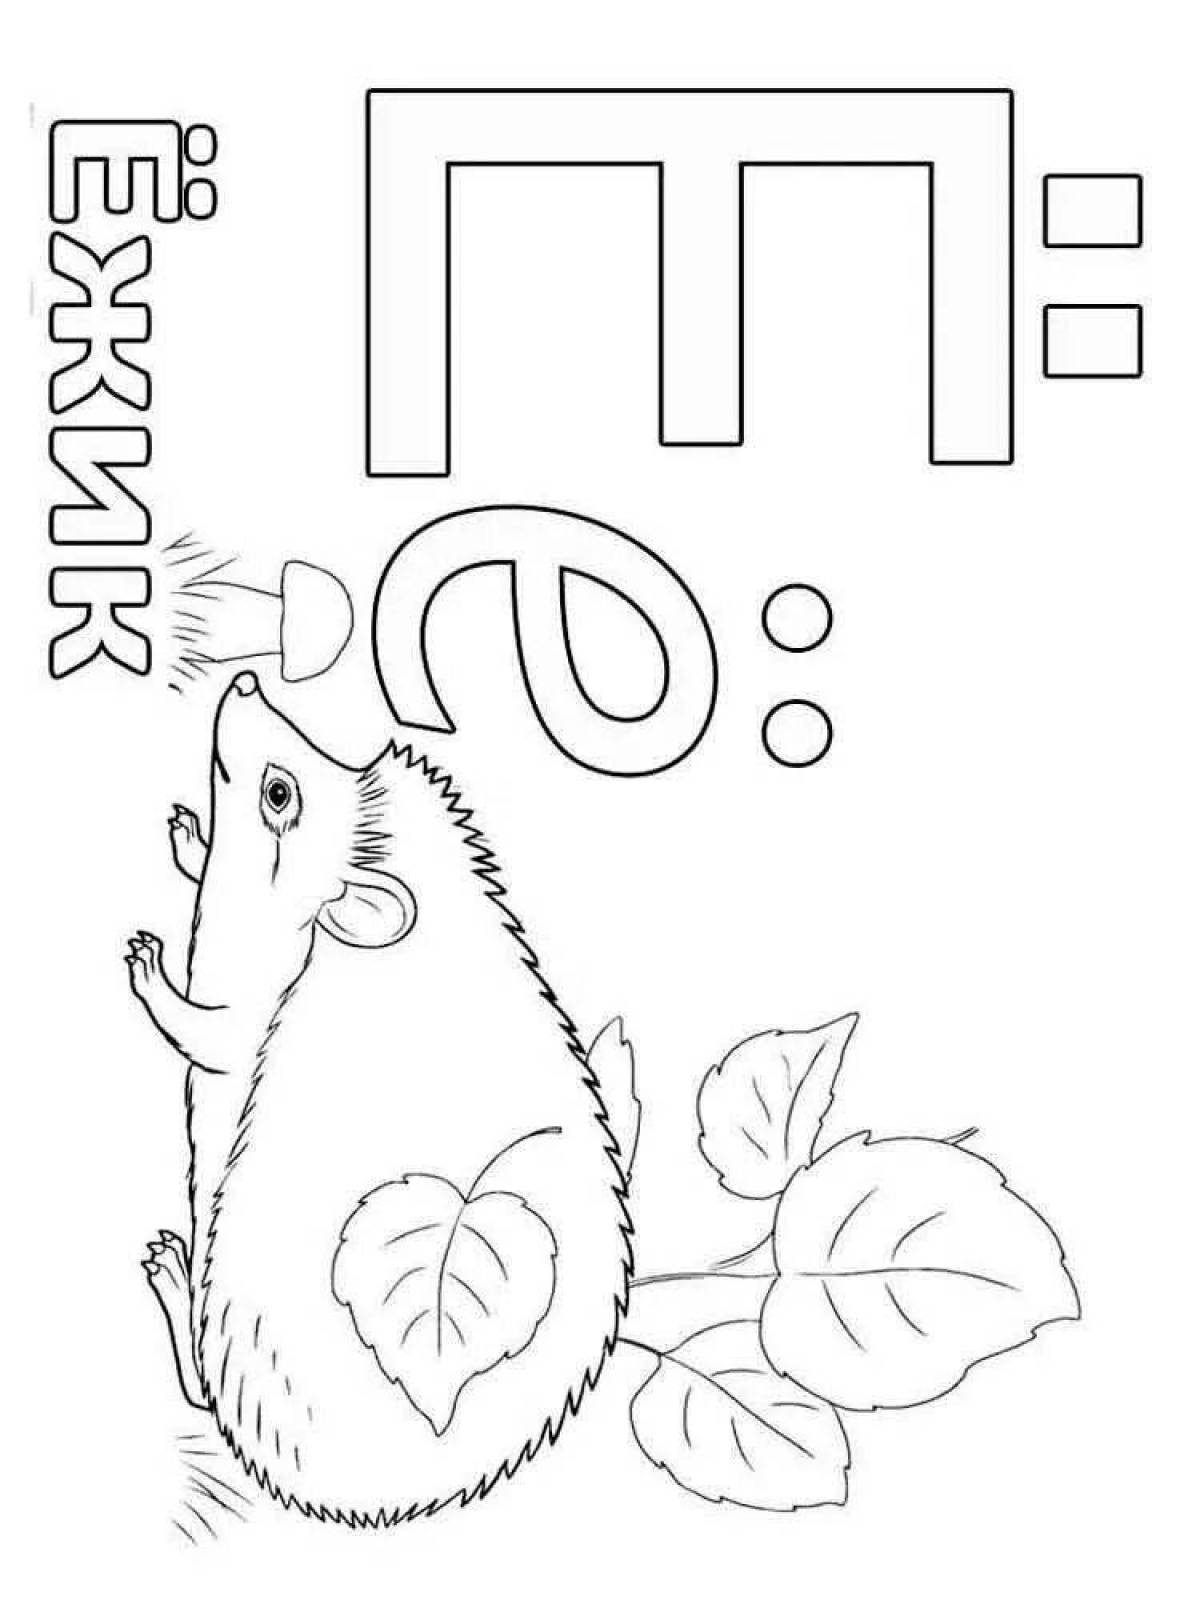 Colorful letter coloring page for 5-6 year olds